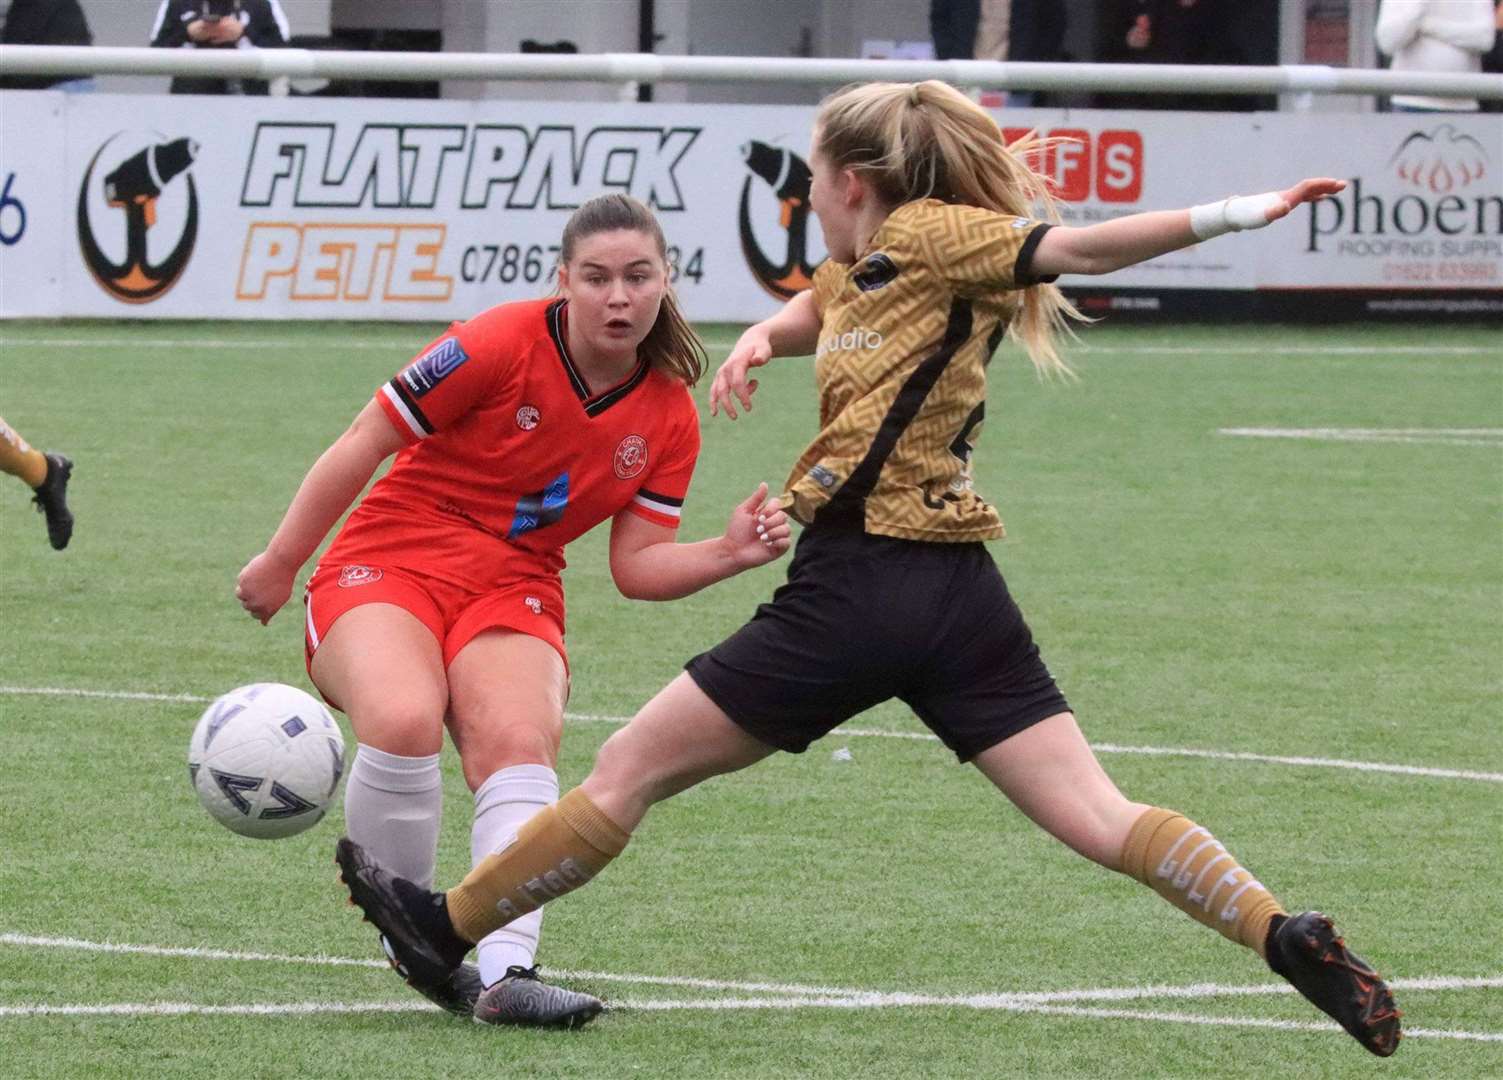 Ciara Hynes takes on Cardiff City on a frustrating day for Chatham’s Women as they were beaten 2-0 at home. Picture: Allen Hollands